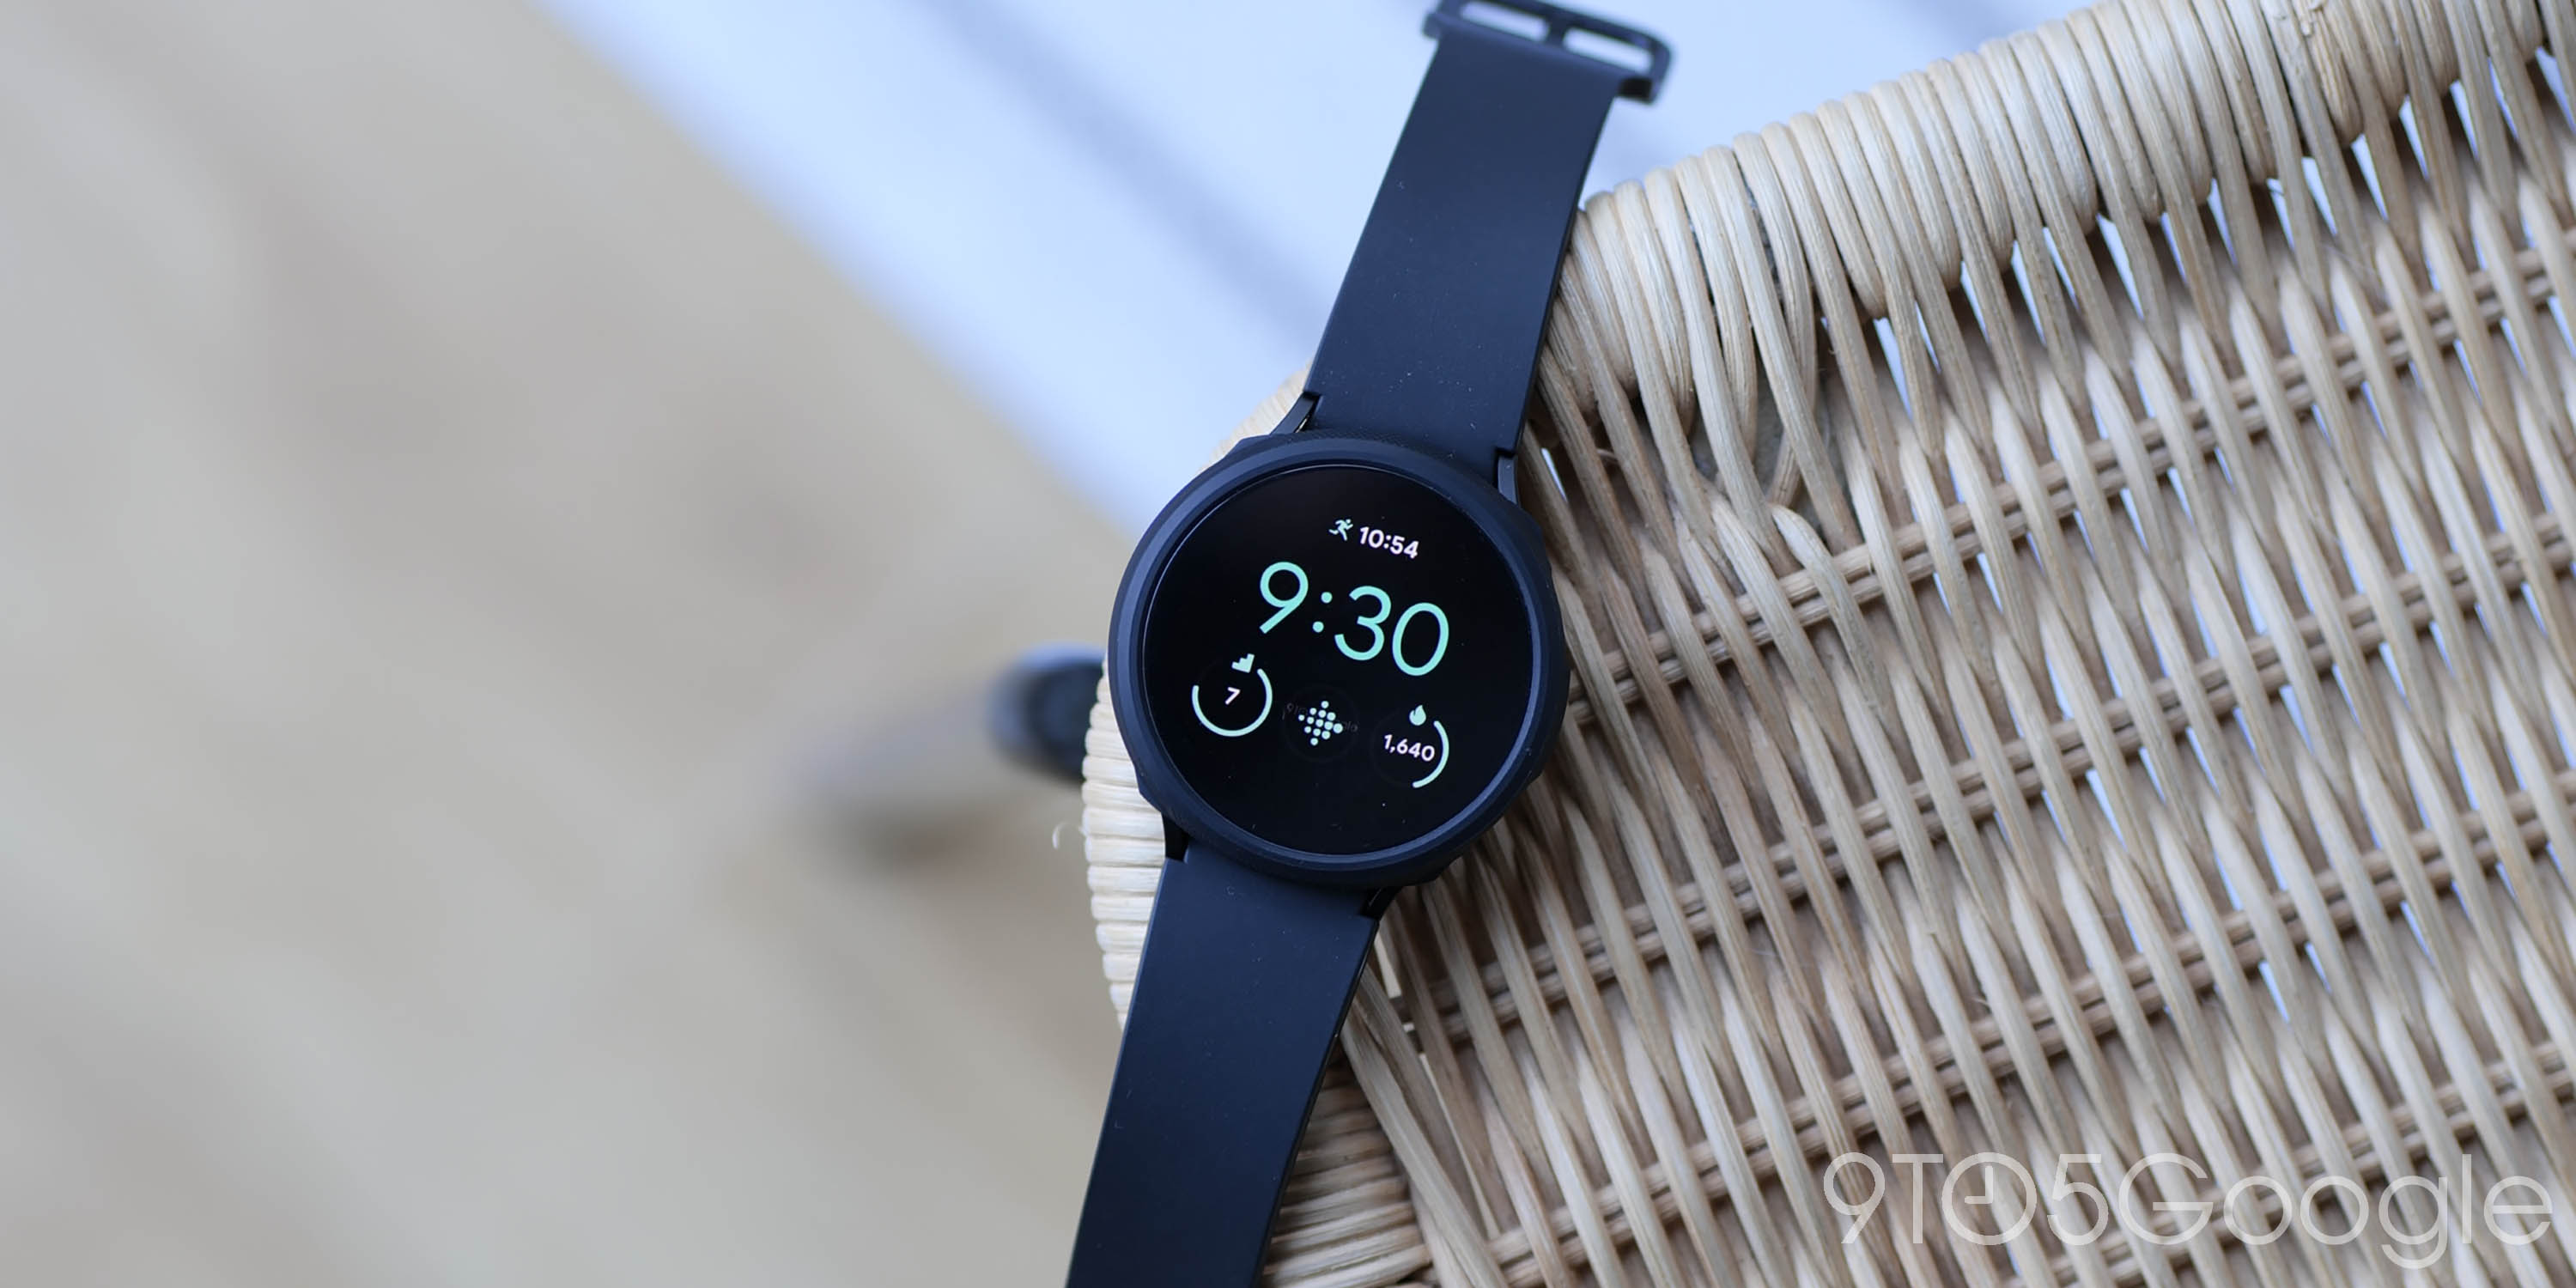 Pixel Watch price: How it compares, and is it worth it? - 9to5Google